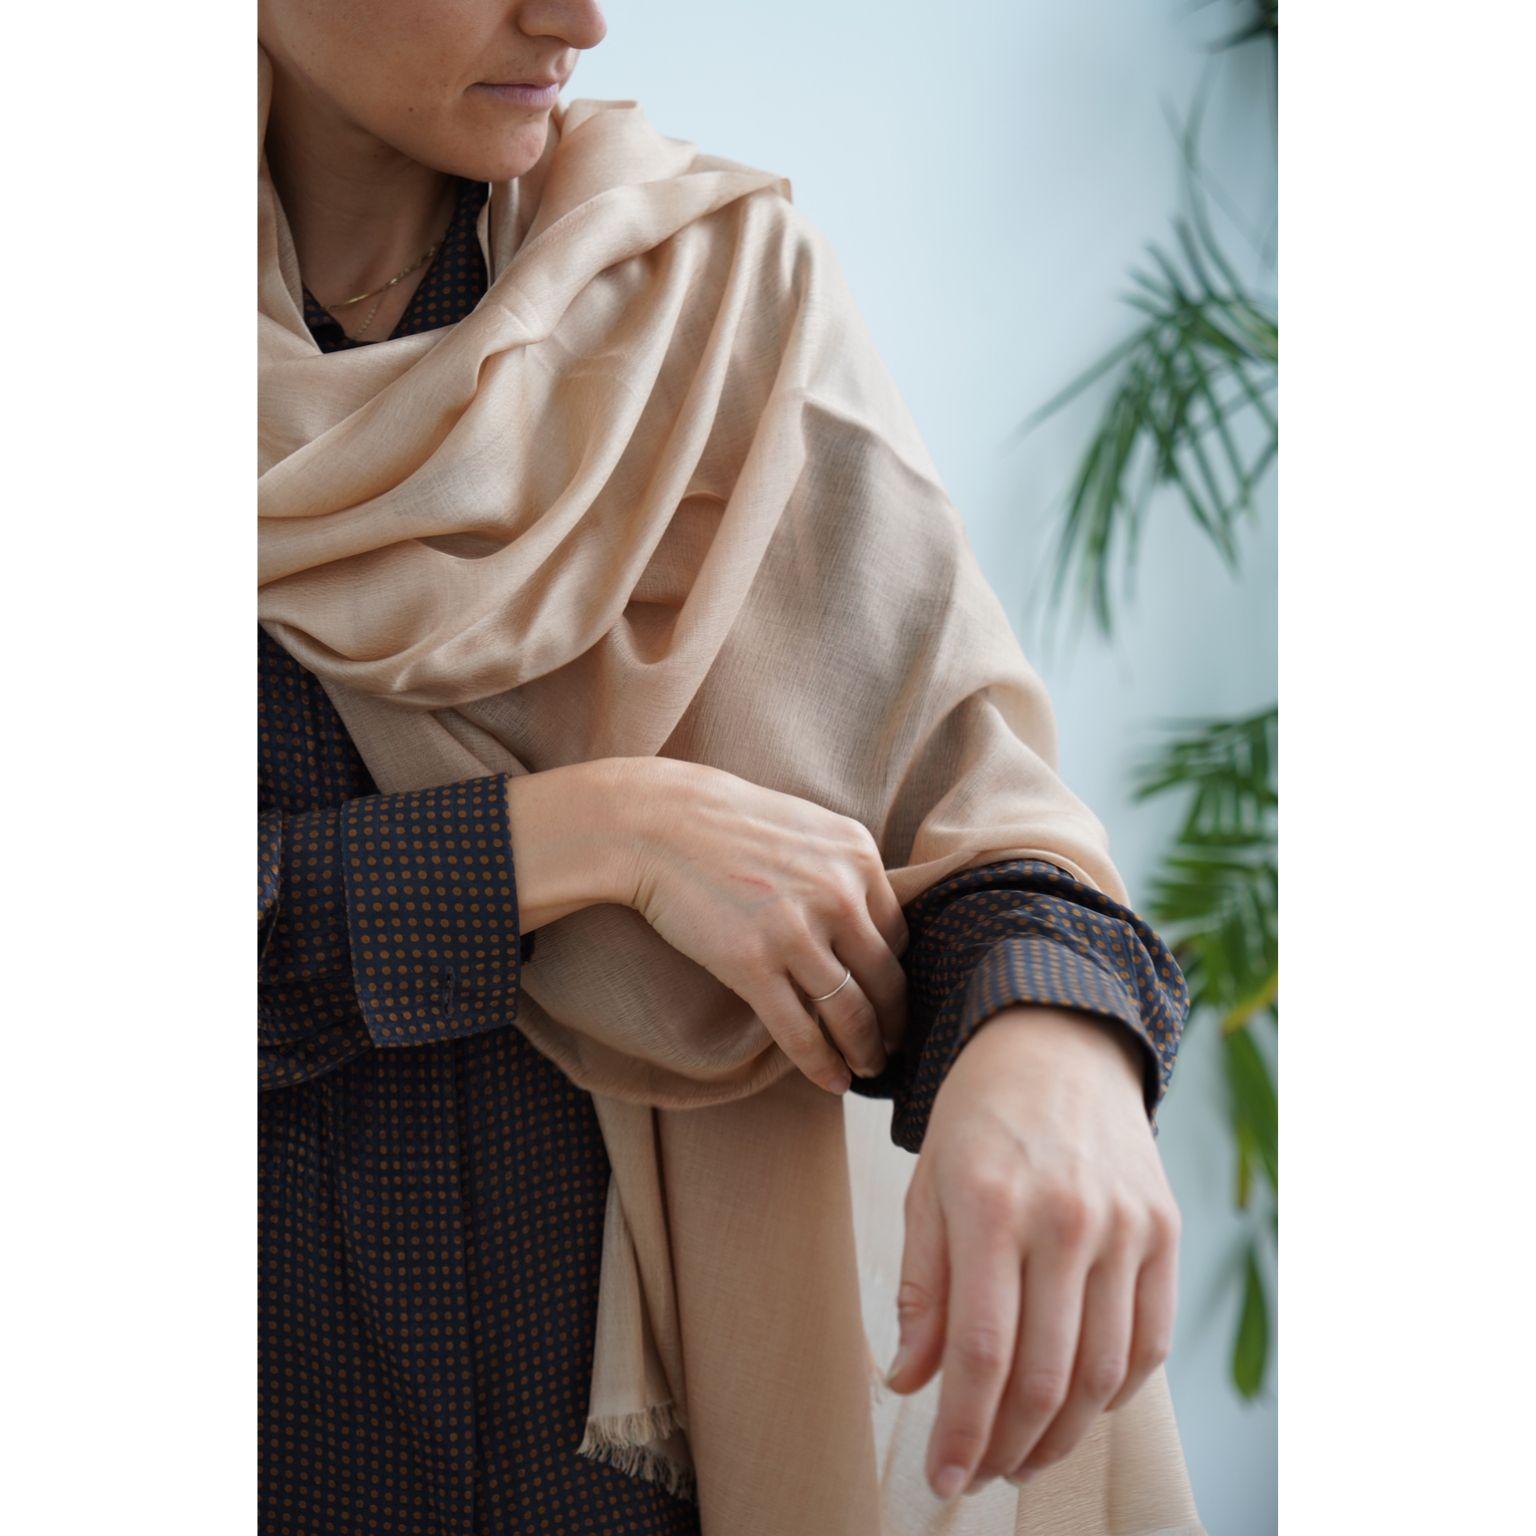 Custom design by Studio Variously, LUNAR scarf / wrap / shawl is a finely handwoven piece by master artisans in Nepal.

A sustainable design brand based out of Michigan, Studio Variously exclusively collaborates with artisan communities to restore